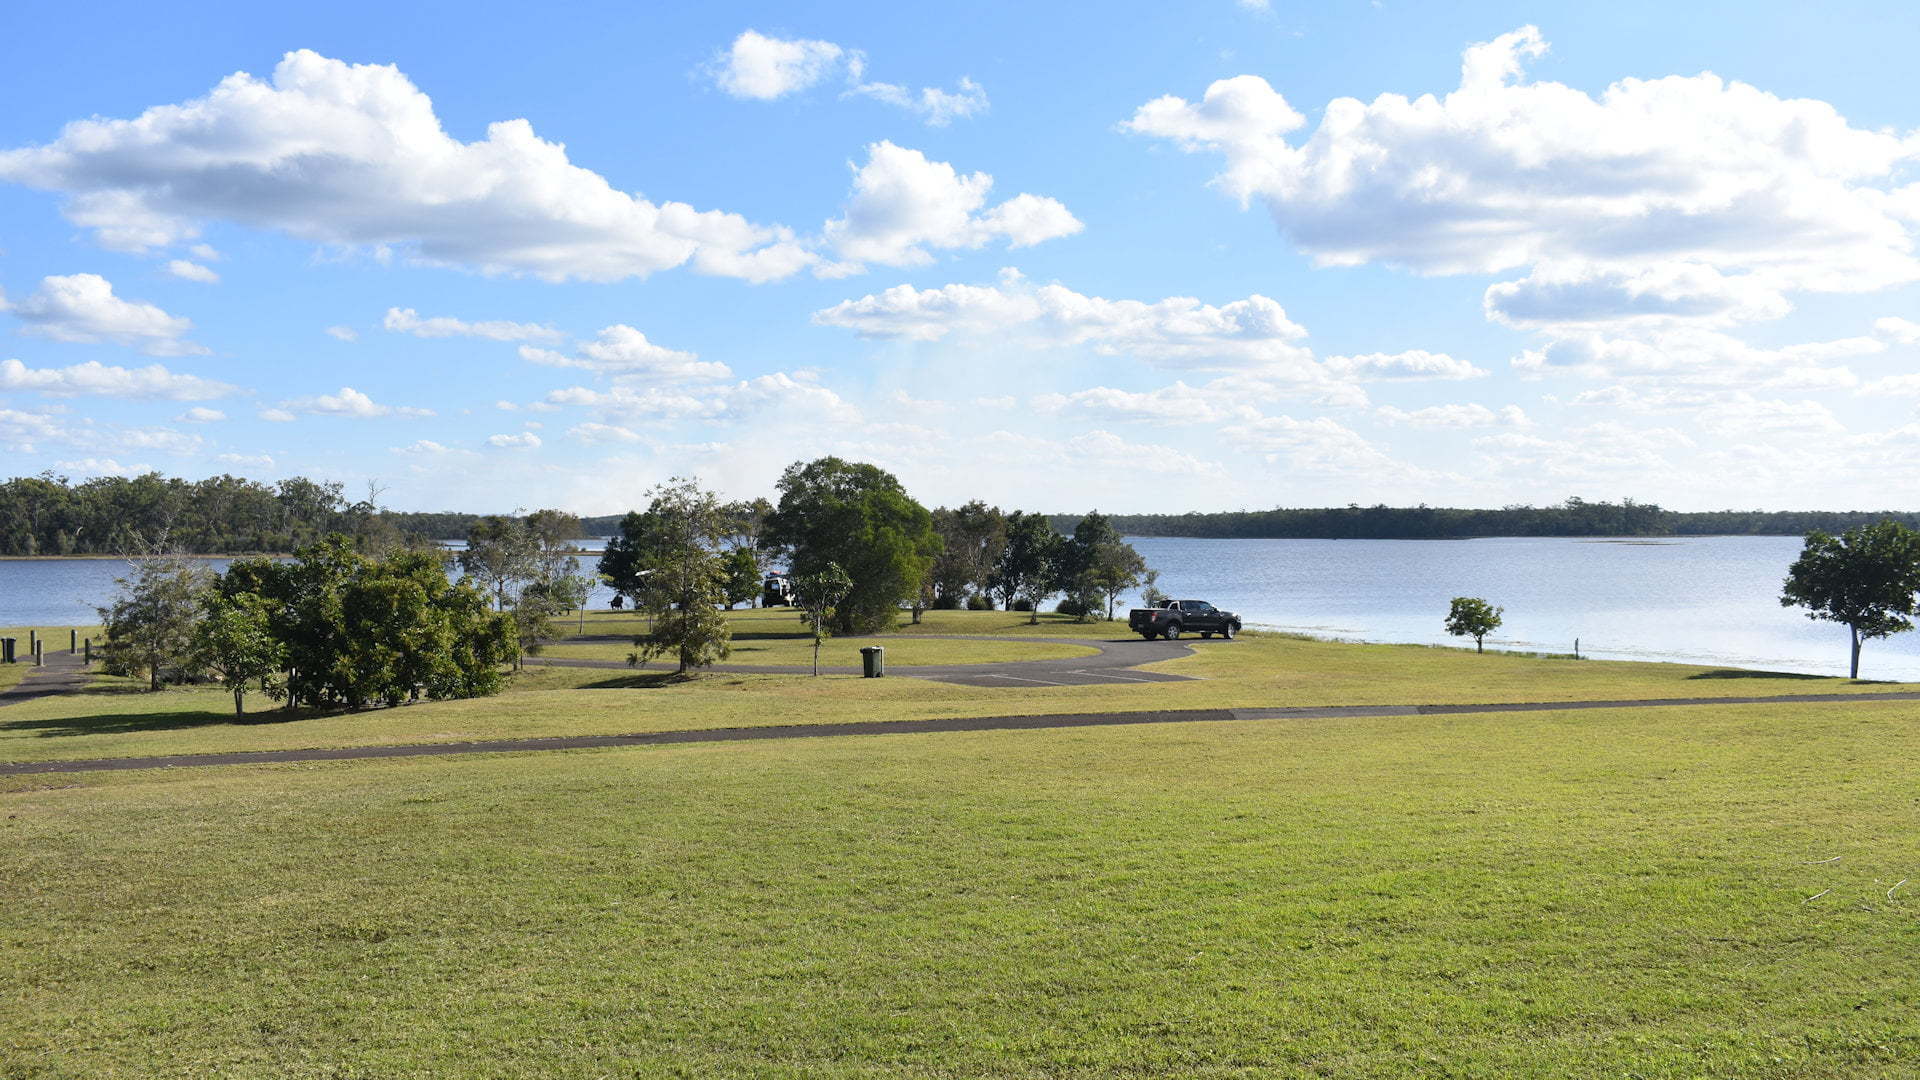 Lake Lenthall camping area, green grass foreground with the lake behind and blue sky with clouds